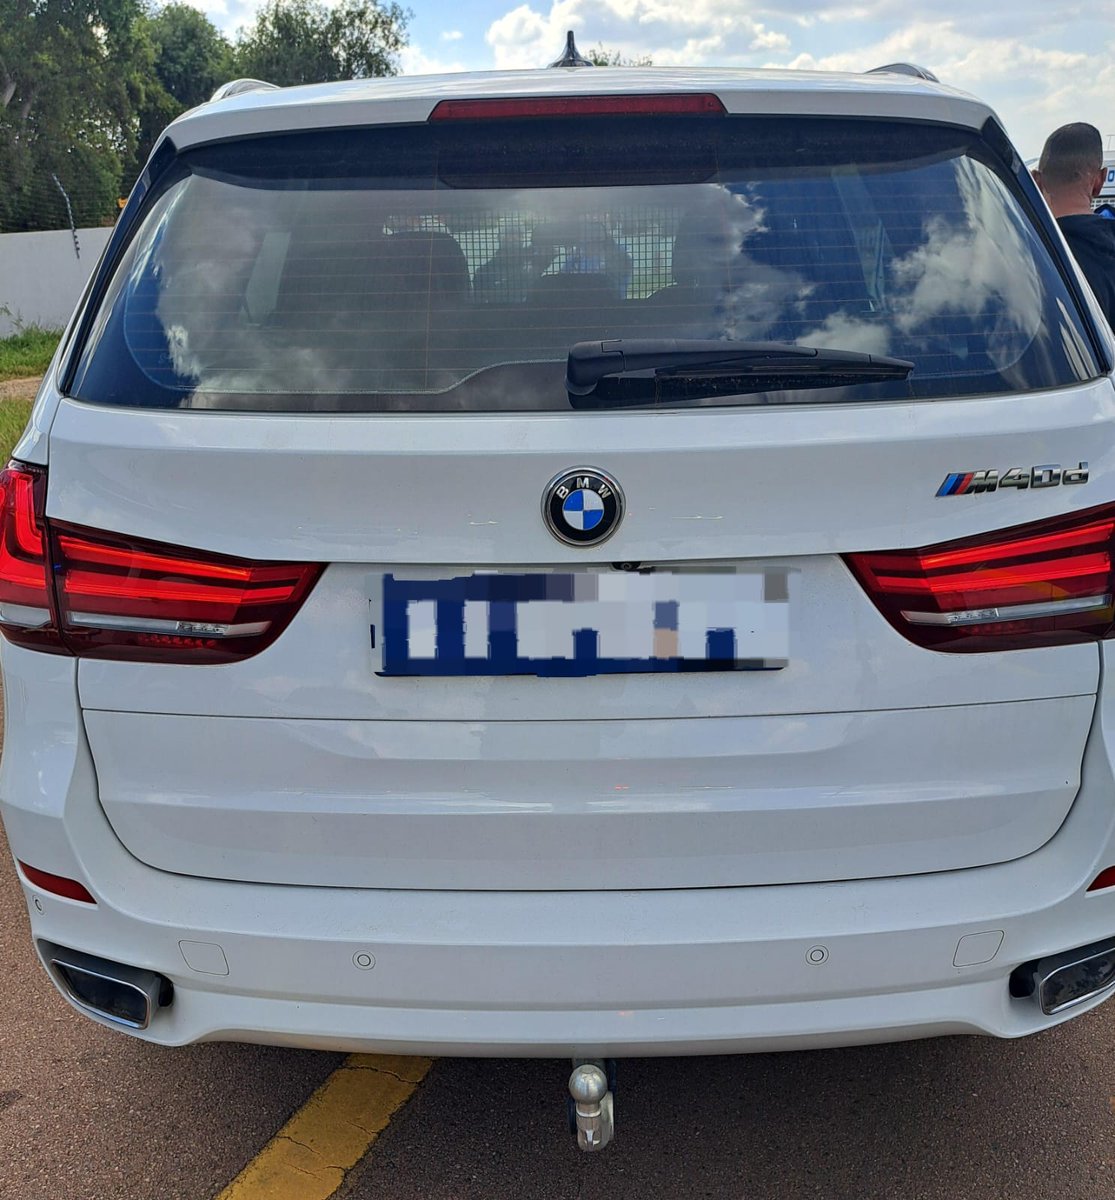 Tracker, SAPS Olivenhoutbosch, Gauteng Traffic, SAICB and Vision Tactical recovered a stolen vehicle. @SAPoliceService @GTP_Traffstats @saicb @visiontactical @MARIUSBROODRYK @StolenVehicle